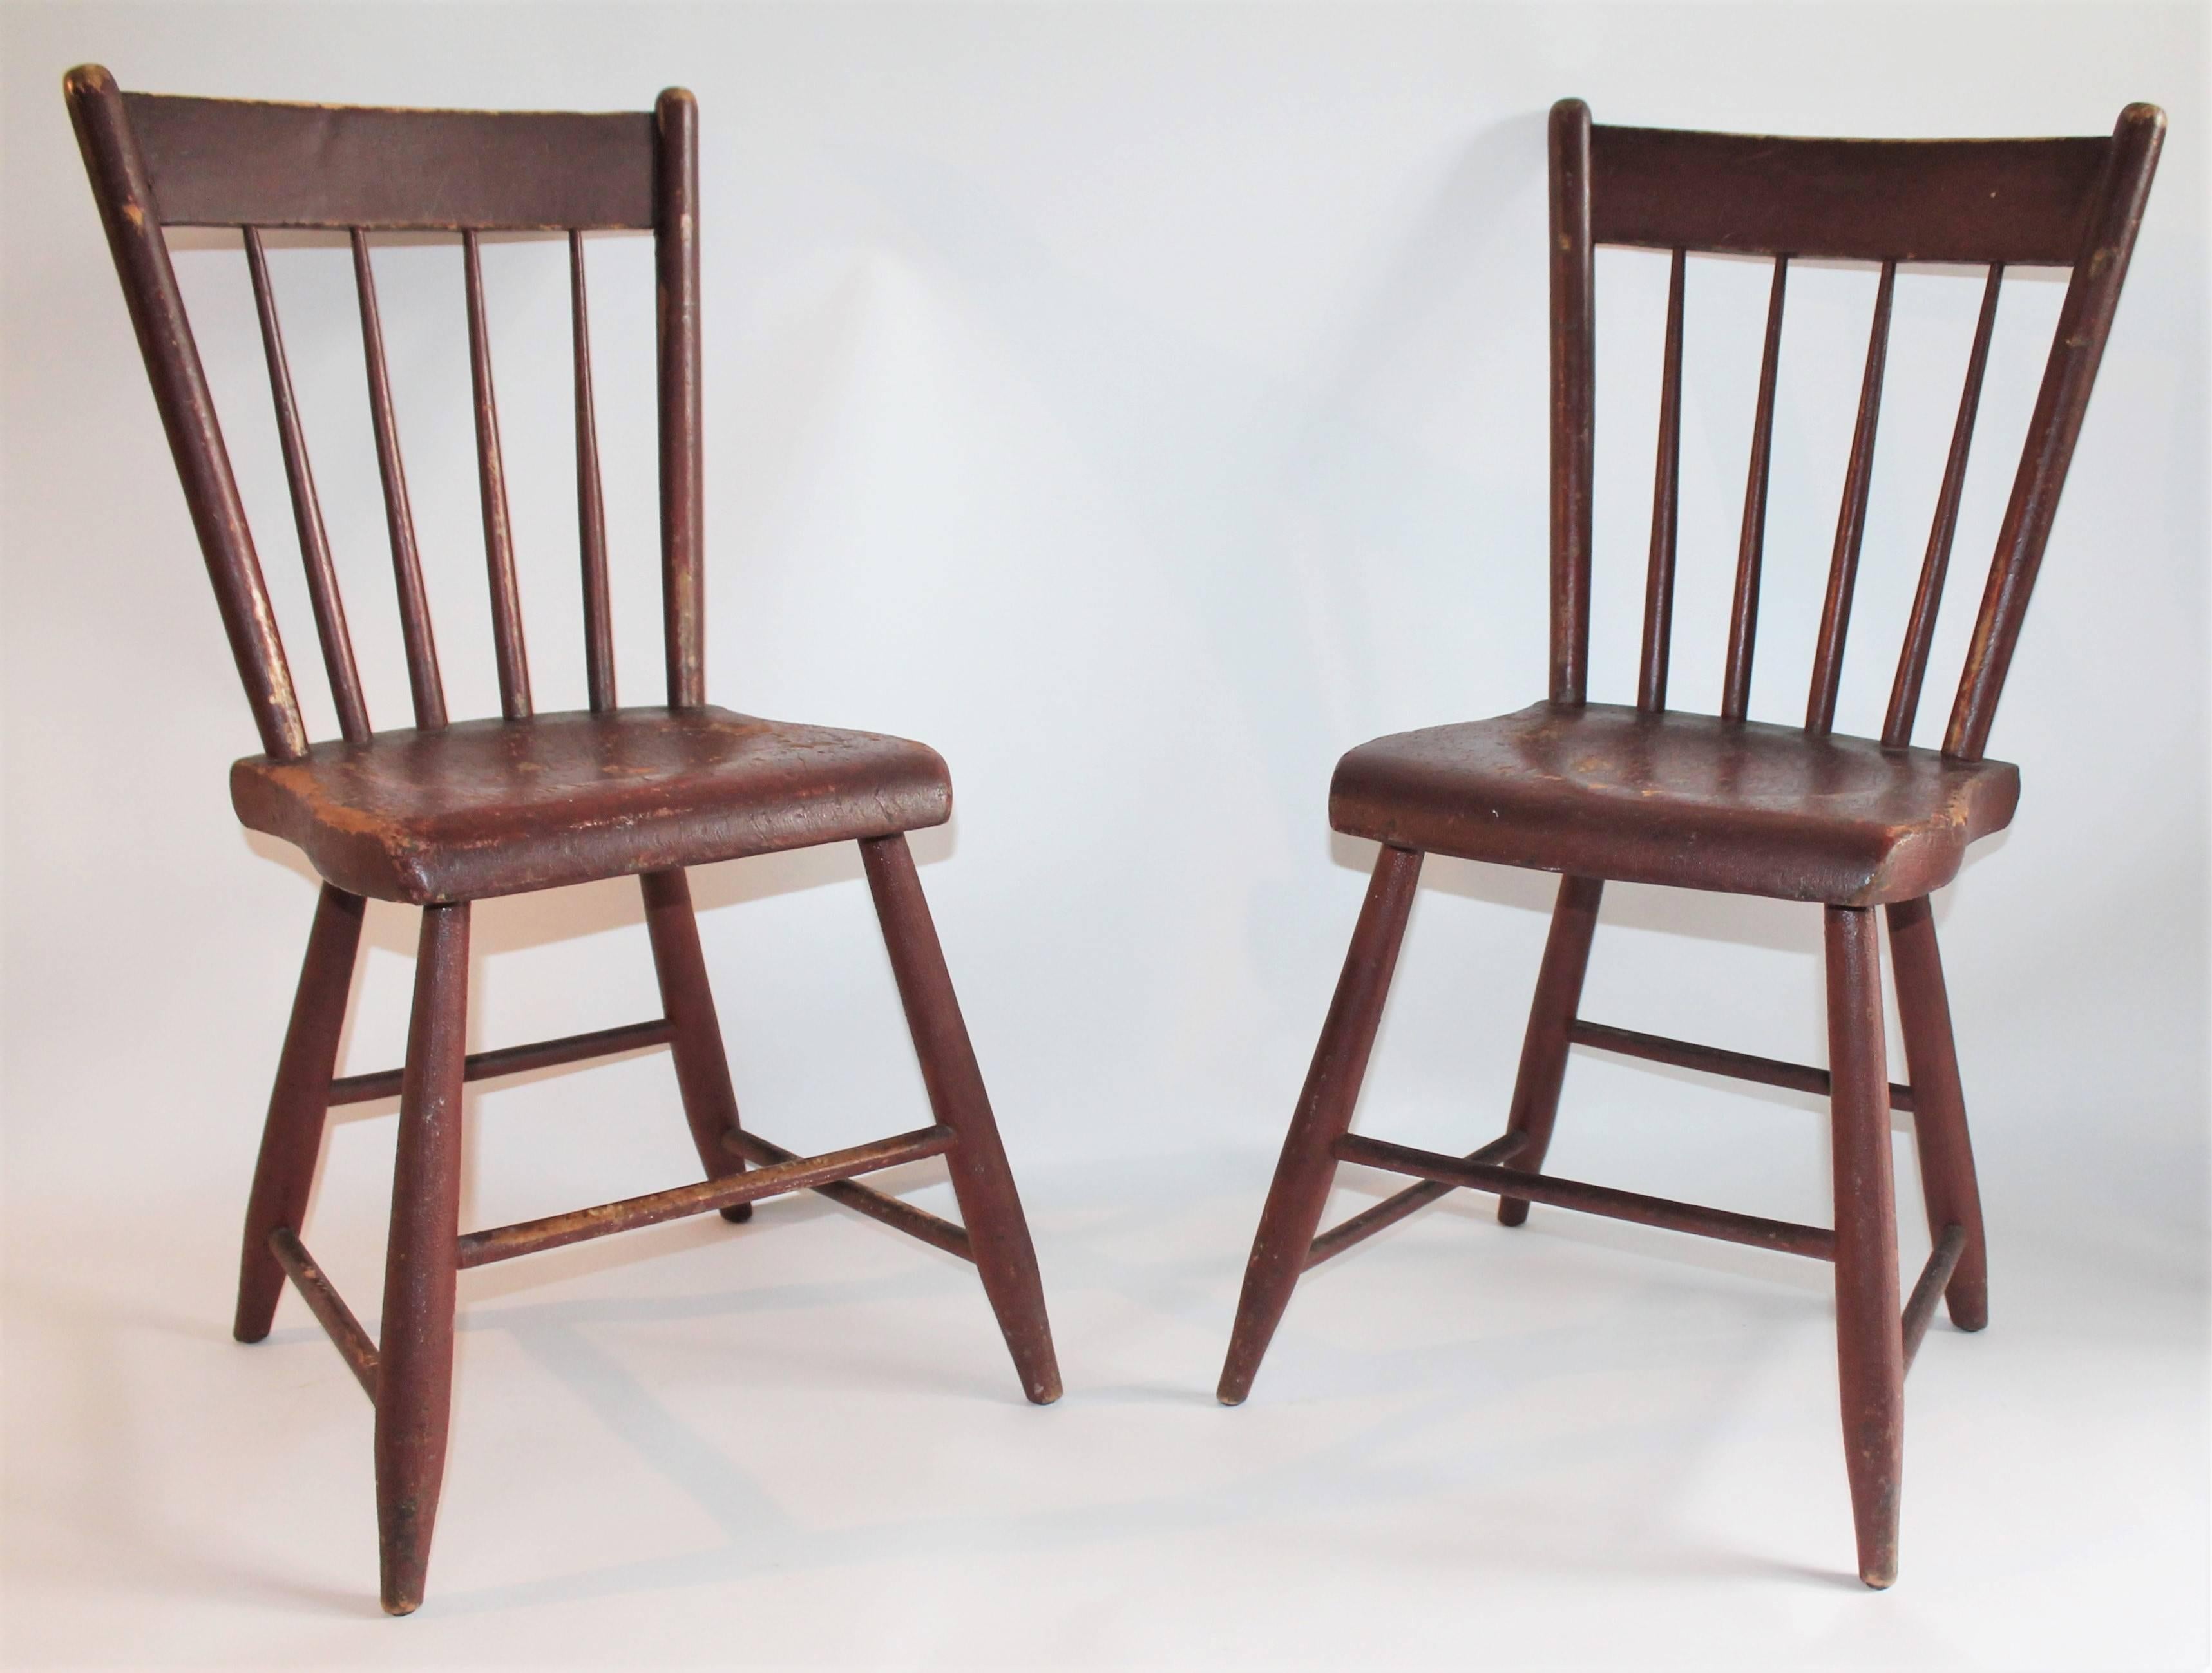 Pair of 19Thc original red painted plank bottom chairs from Pennsylvania. Great side chairs to go with a farm table.